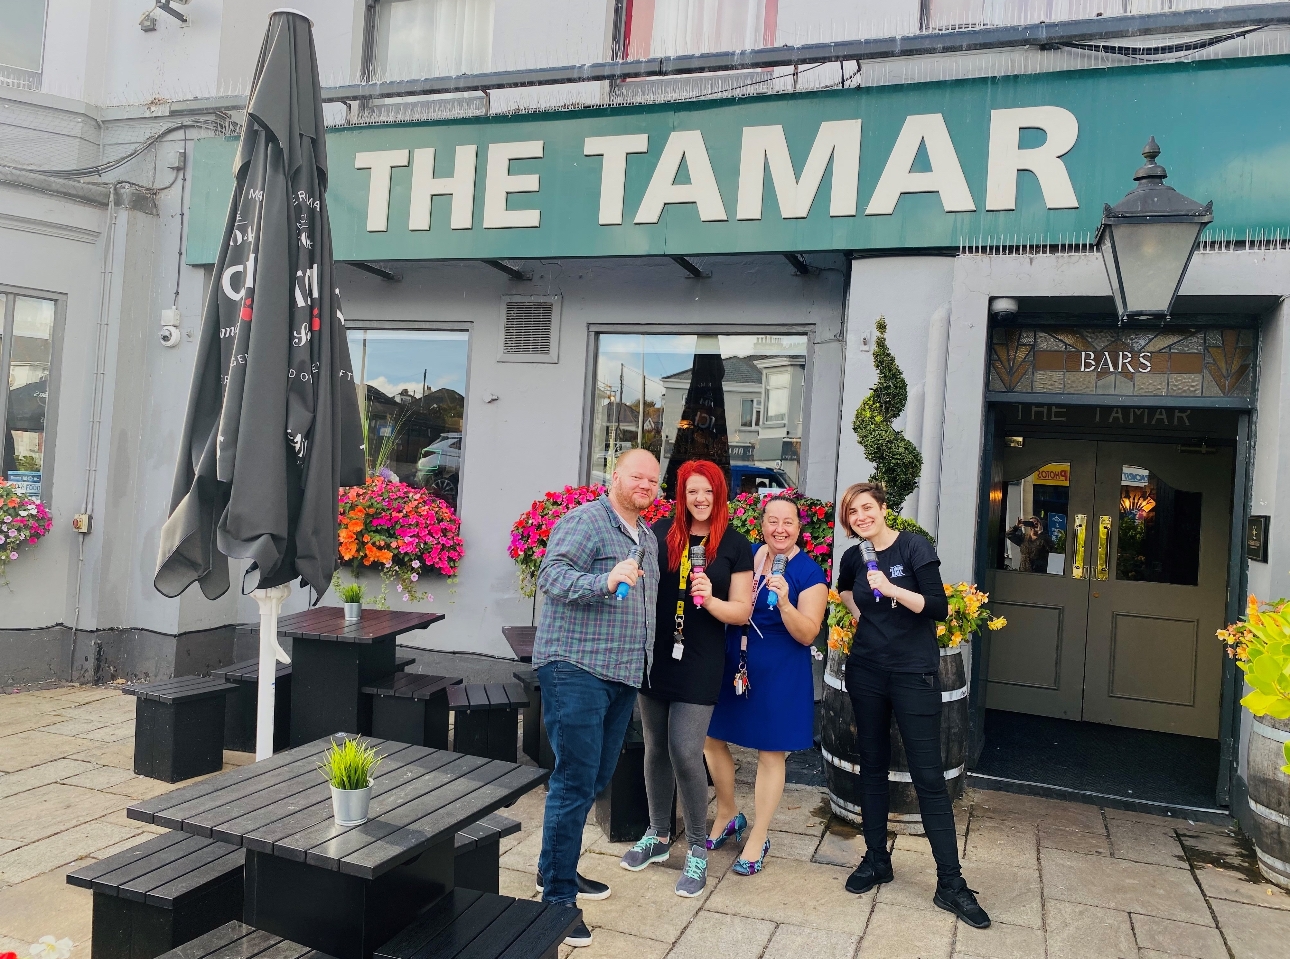 The Tamar in Plymouth hosts T Factor karaoke competition